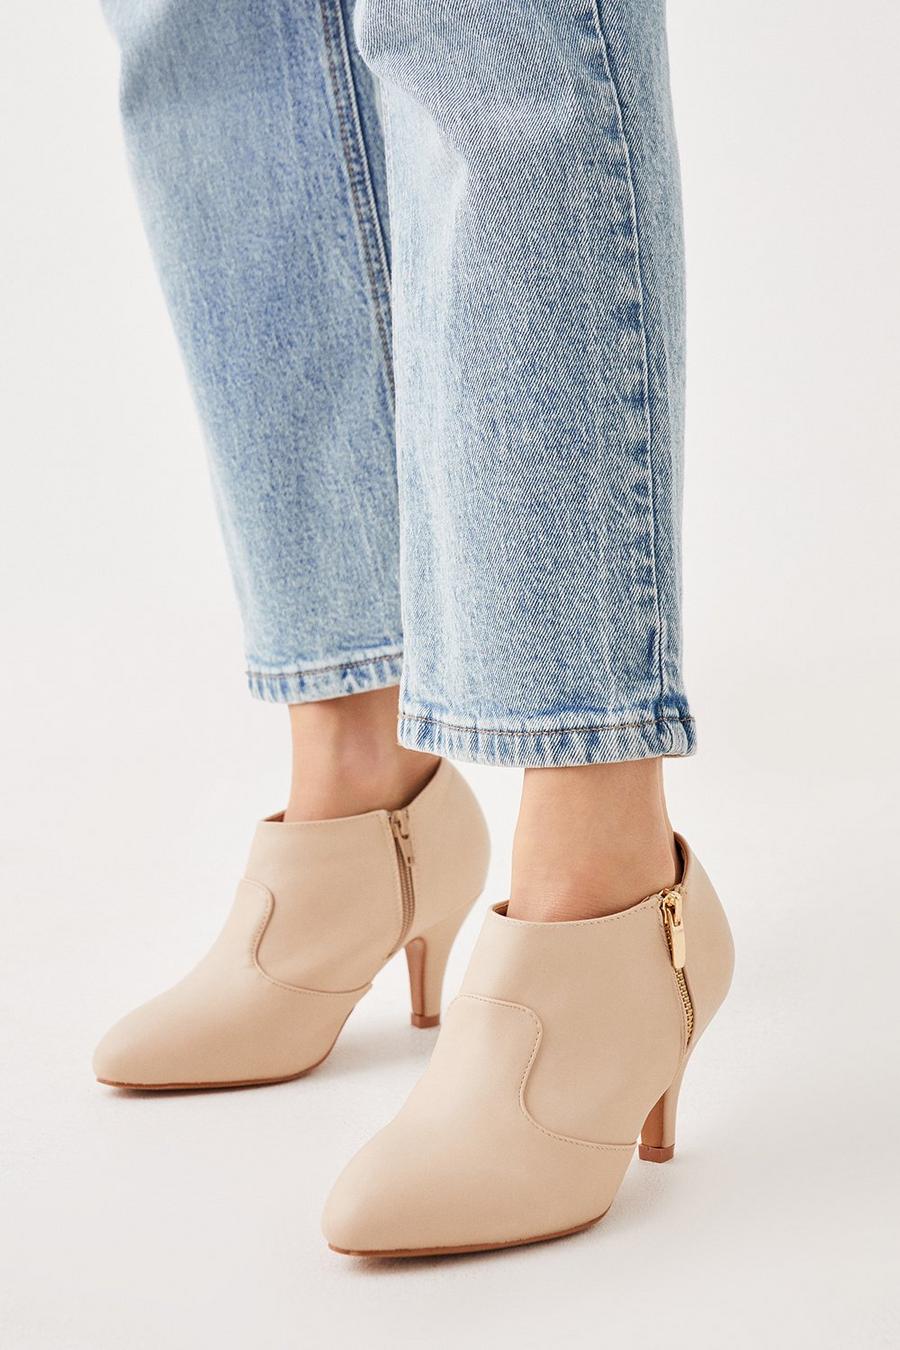 Good For The Sole: Marlo Comfort Zip Heeled Ankle Boots